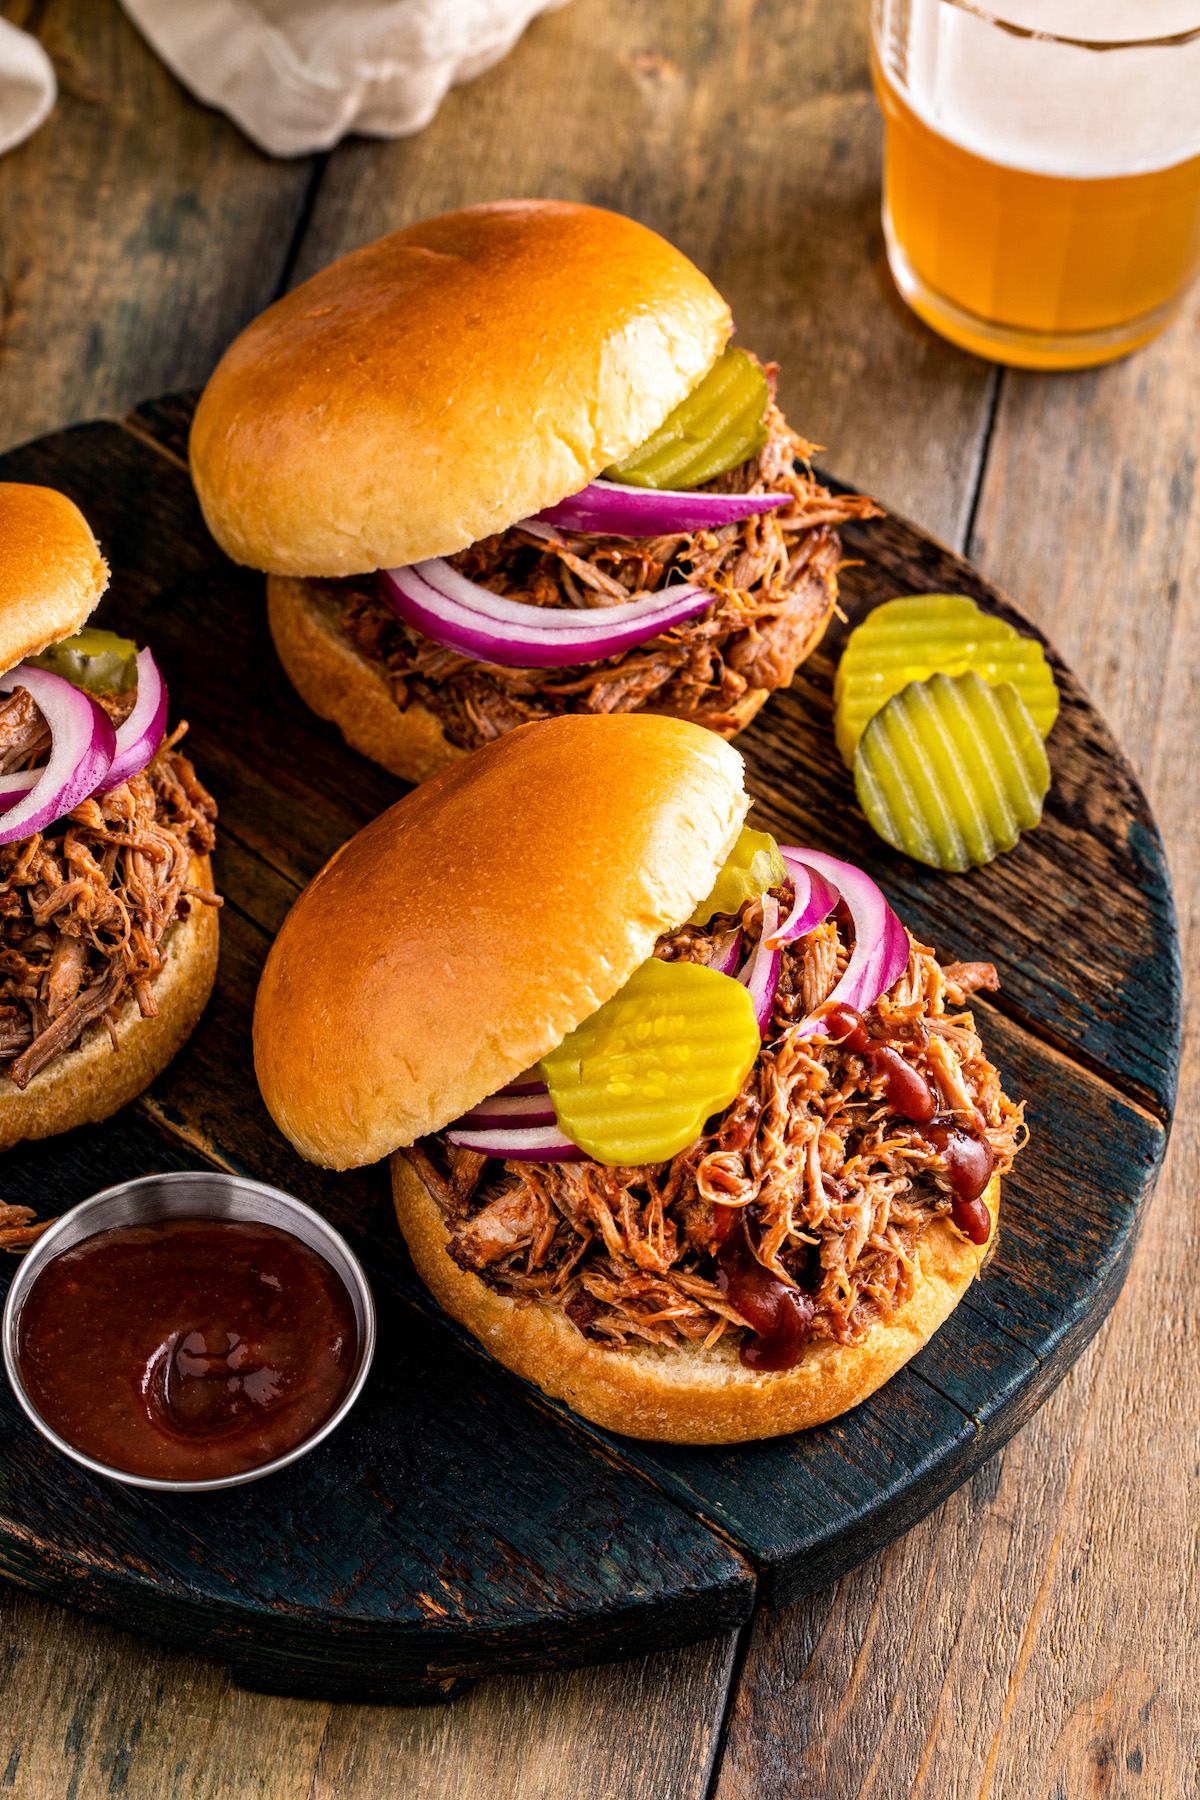 Three pulled pork sandwiches with a side of bbq sauce and a beer.